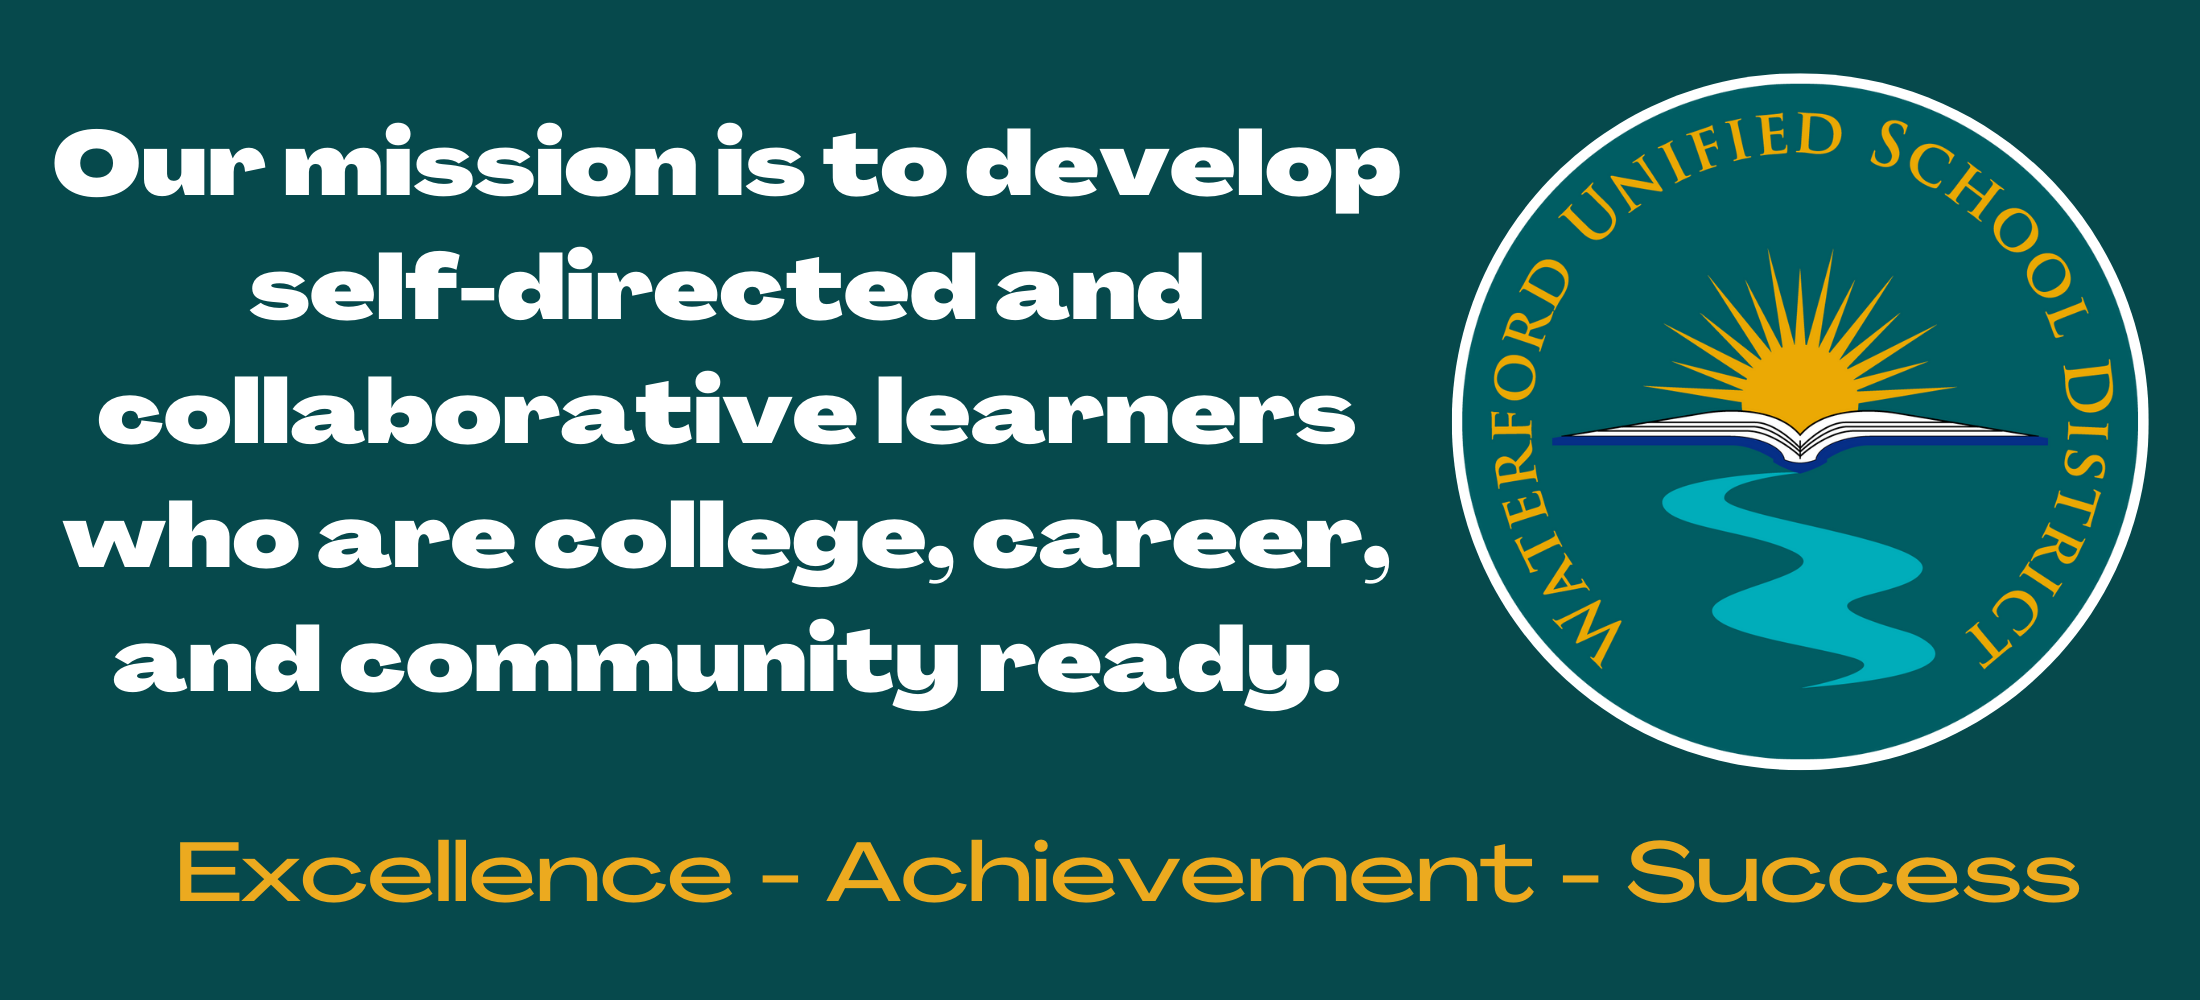 our mission is to develop self-directed and collaborative learners who are college,  career, and community ready.